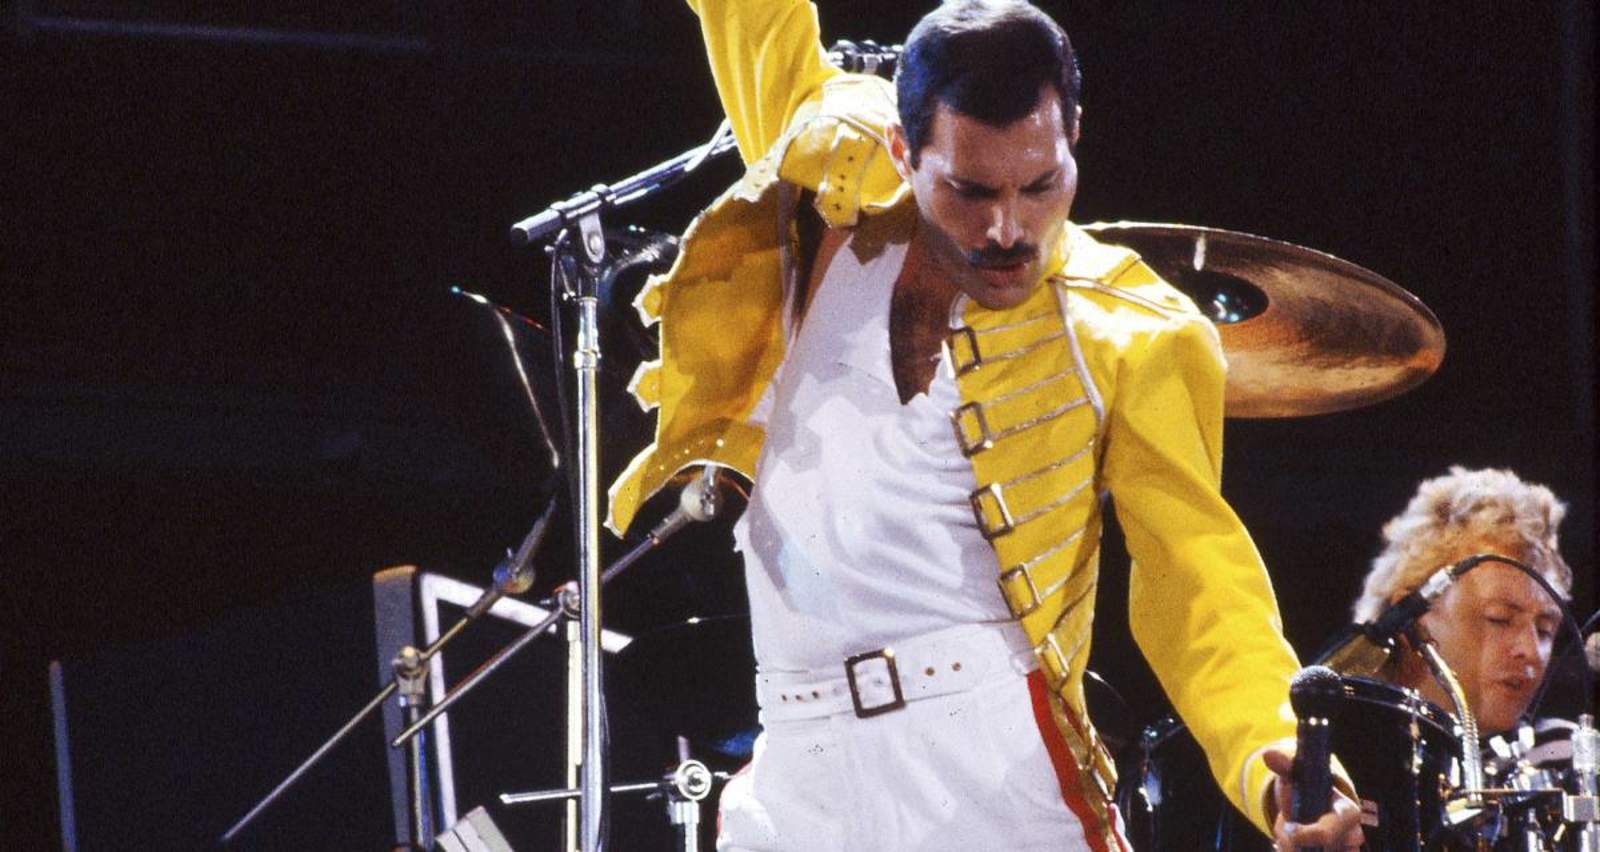 1991: Freddie Mercury, one of the statues of contemporary music, gives his last breath